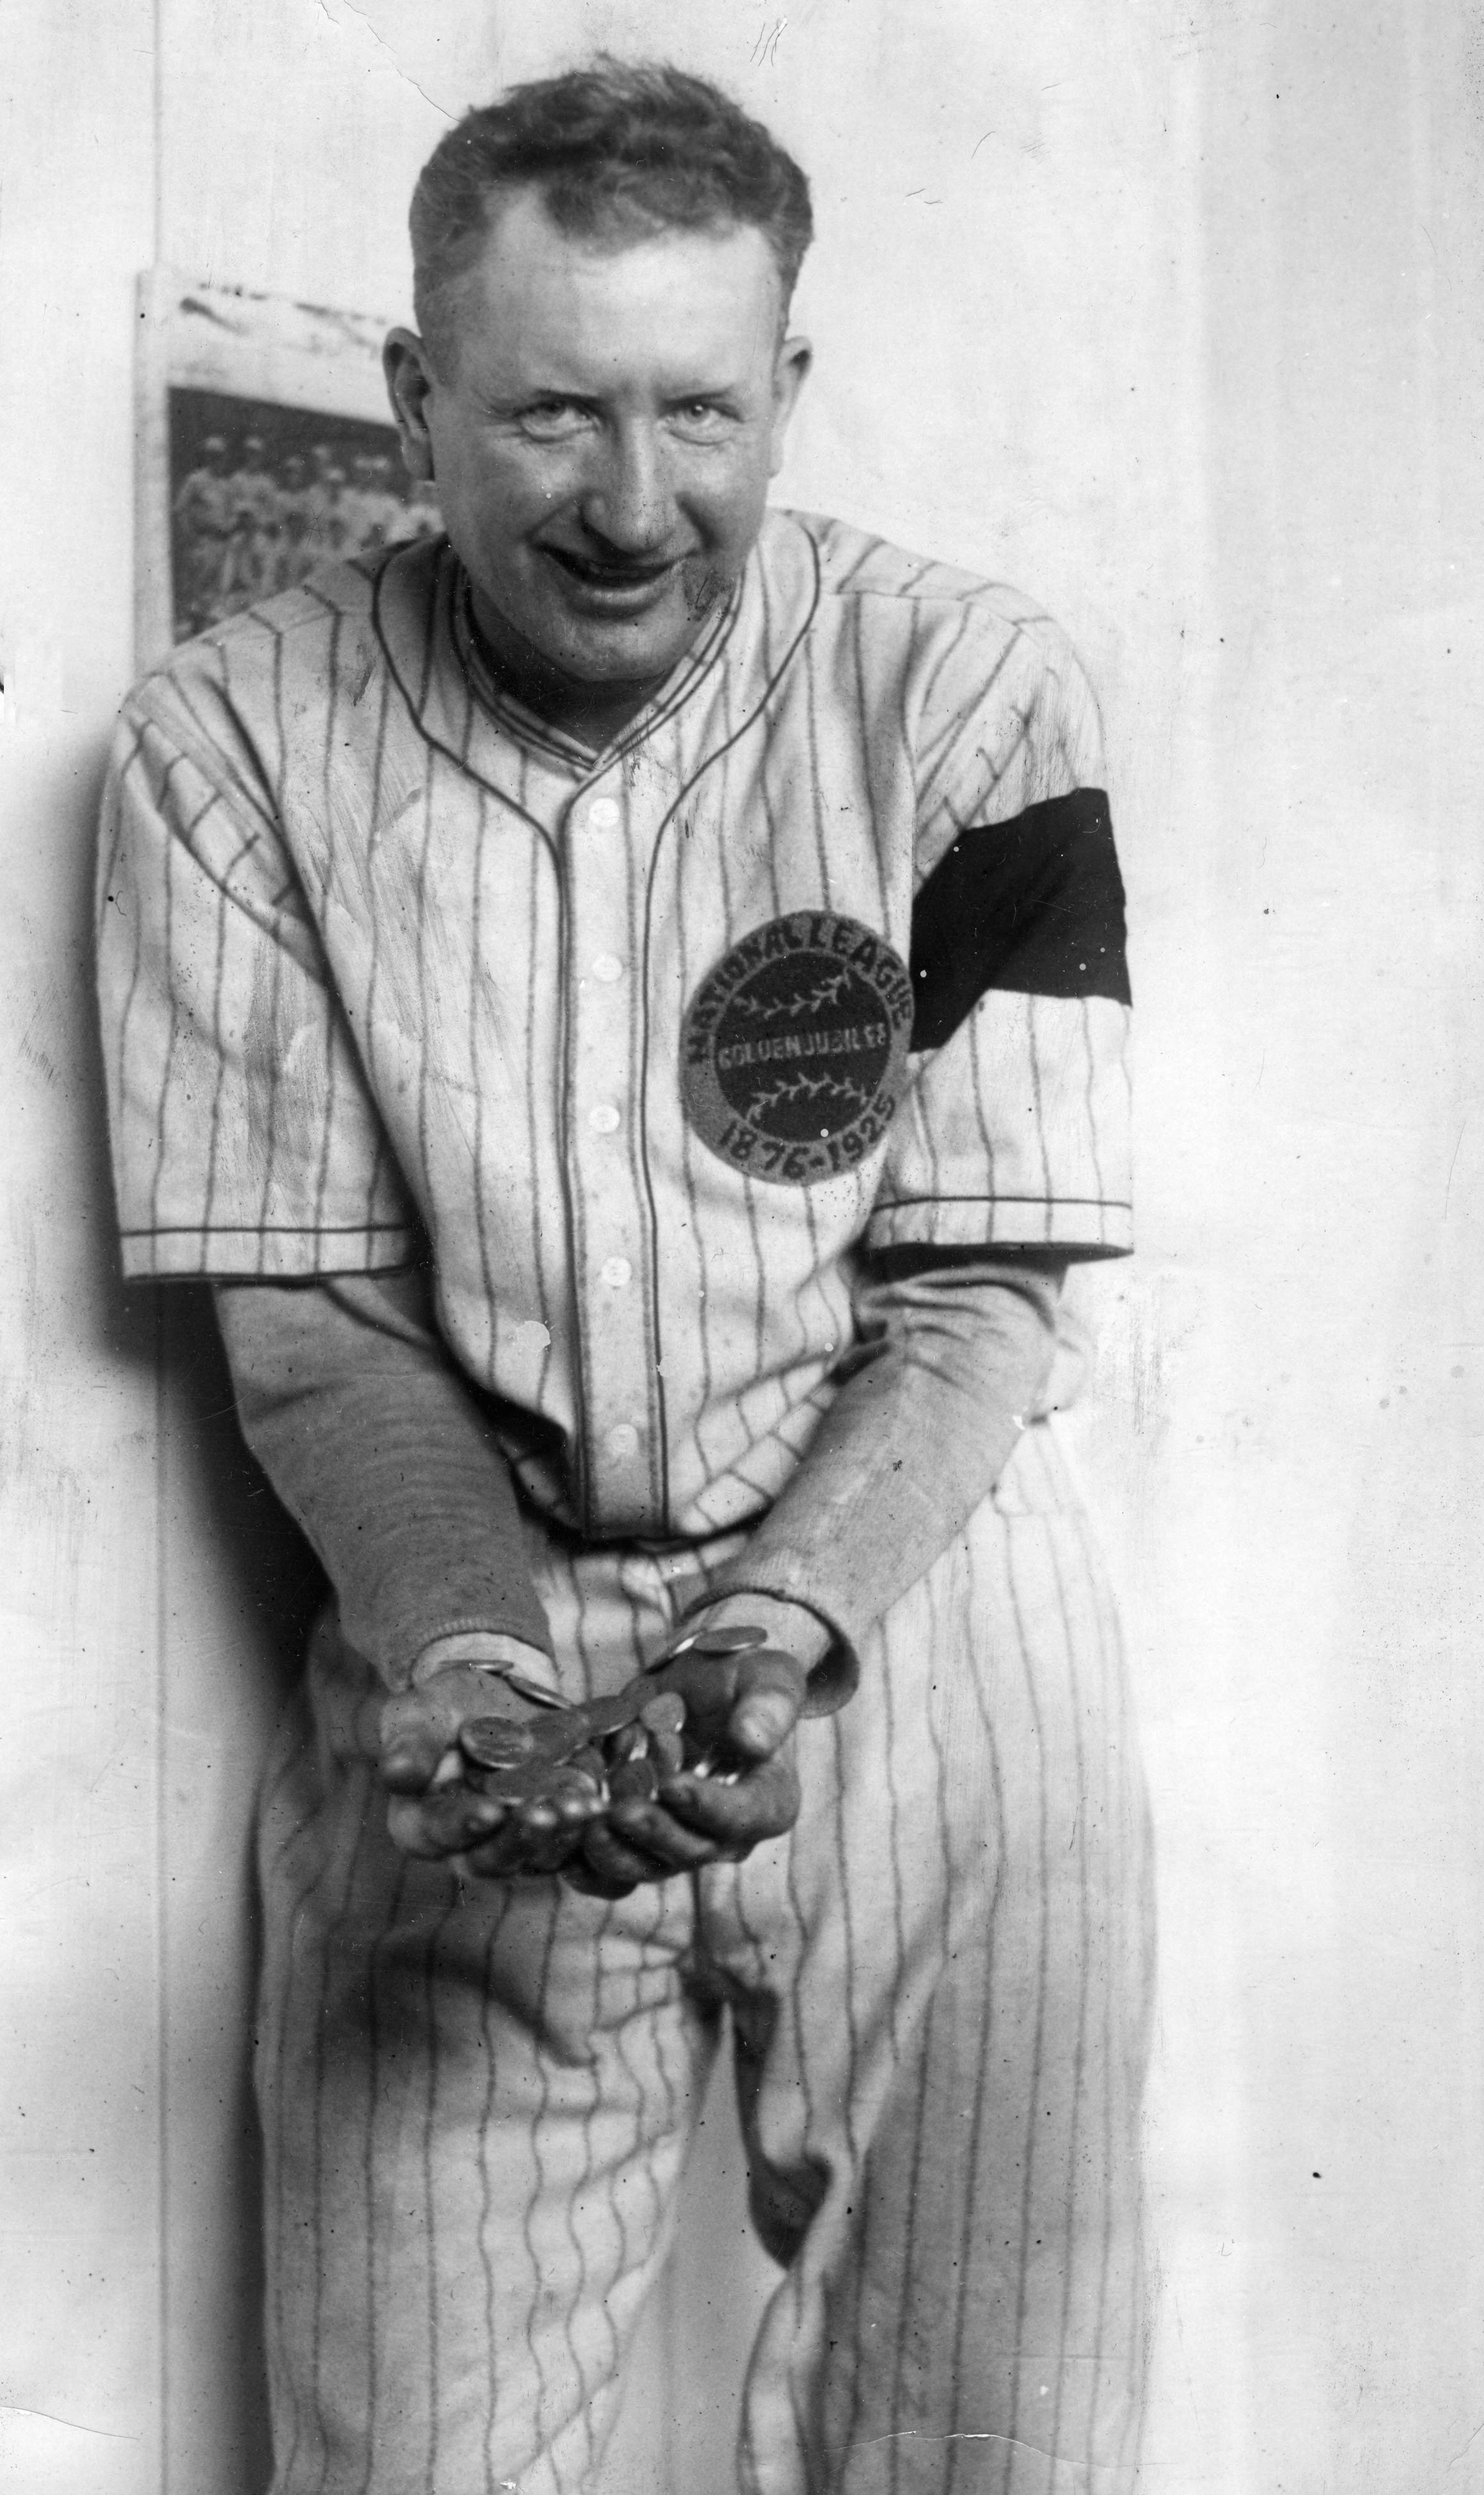 Dazzy Vance, pitcher for the Brooklyn Dodgers and Most Valuable Player in the National League in 1926 | Photo: Getty Images